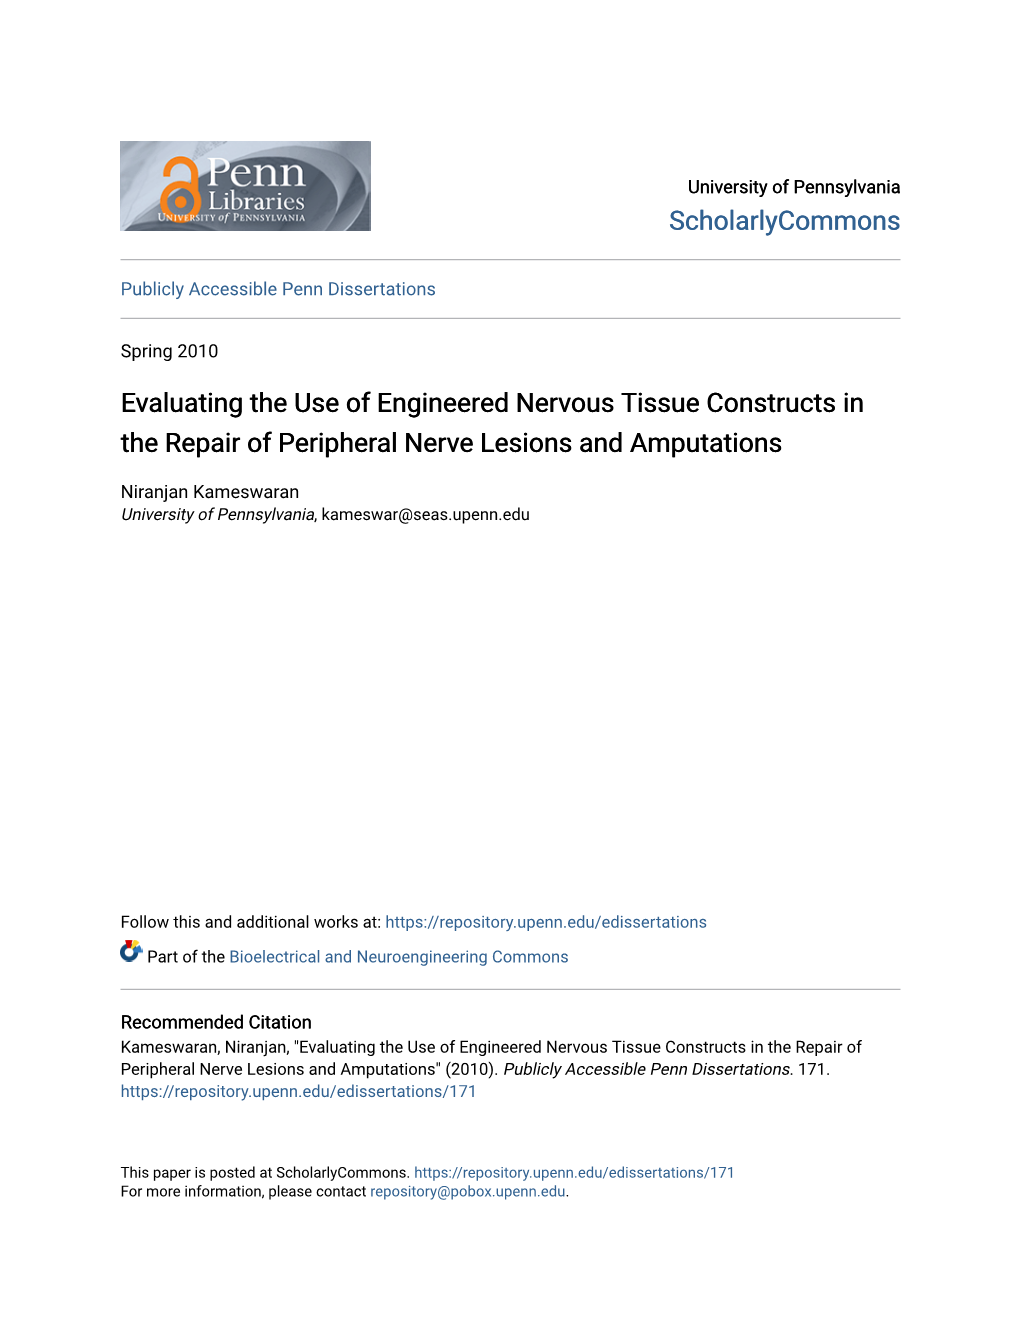 Evaluating the Use of Engineered Nervous Tissue Constructs in the Repair of Peripheral Nerve Lesions and Amputations